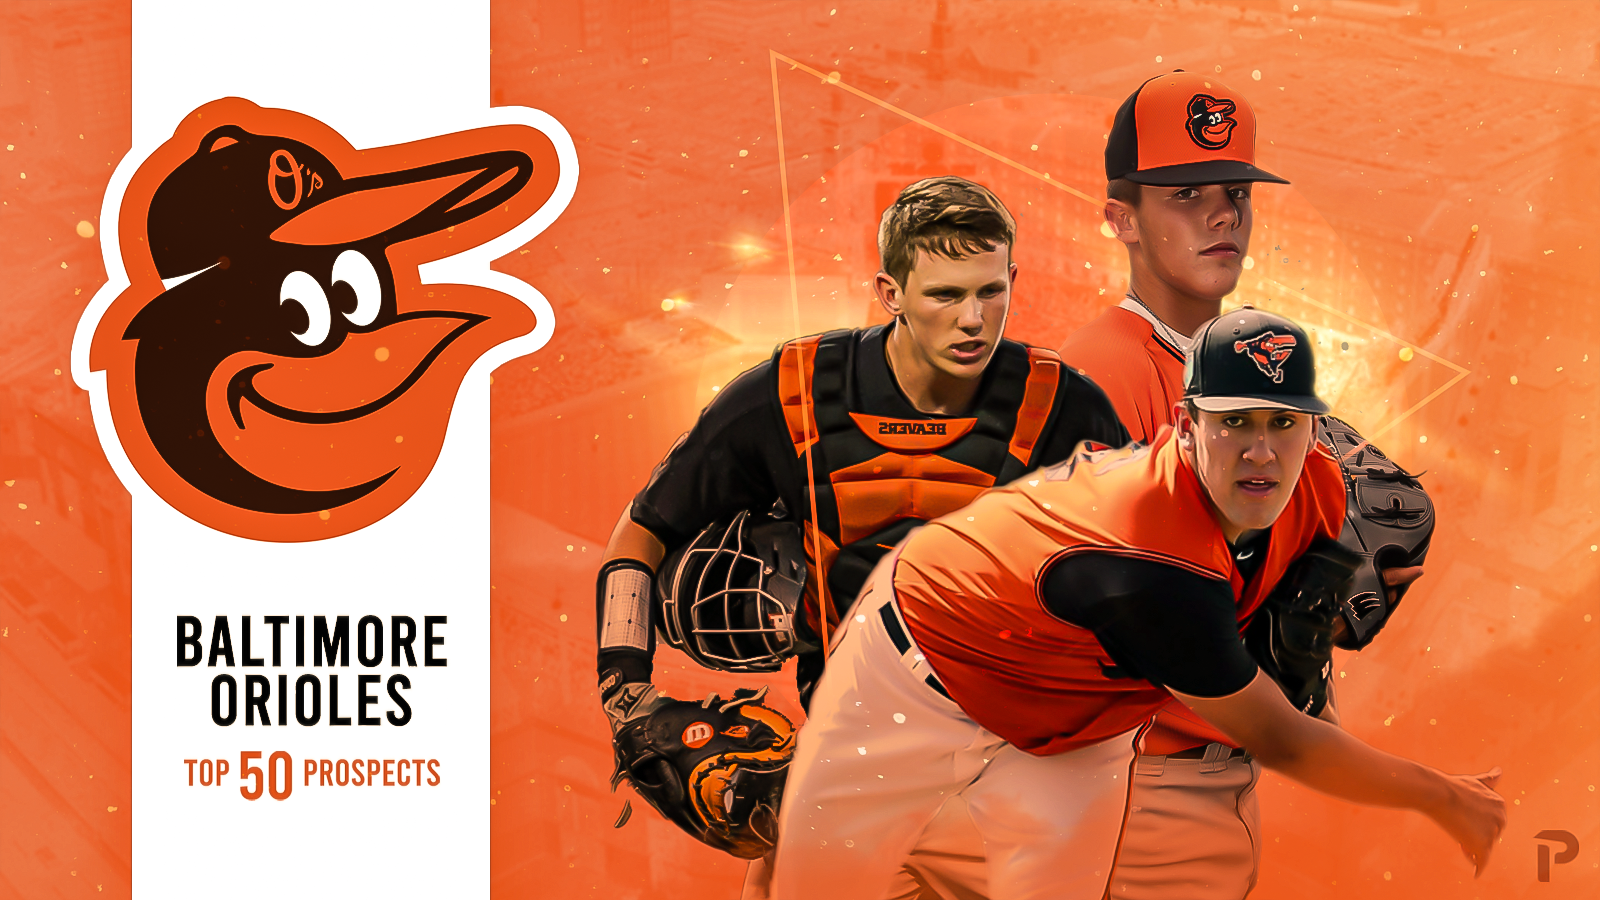 What tomorrow holds A look at what could be the 2023 Baltimore Orioles